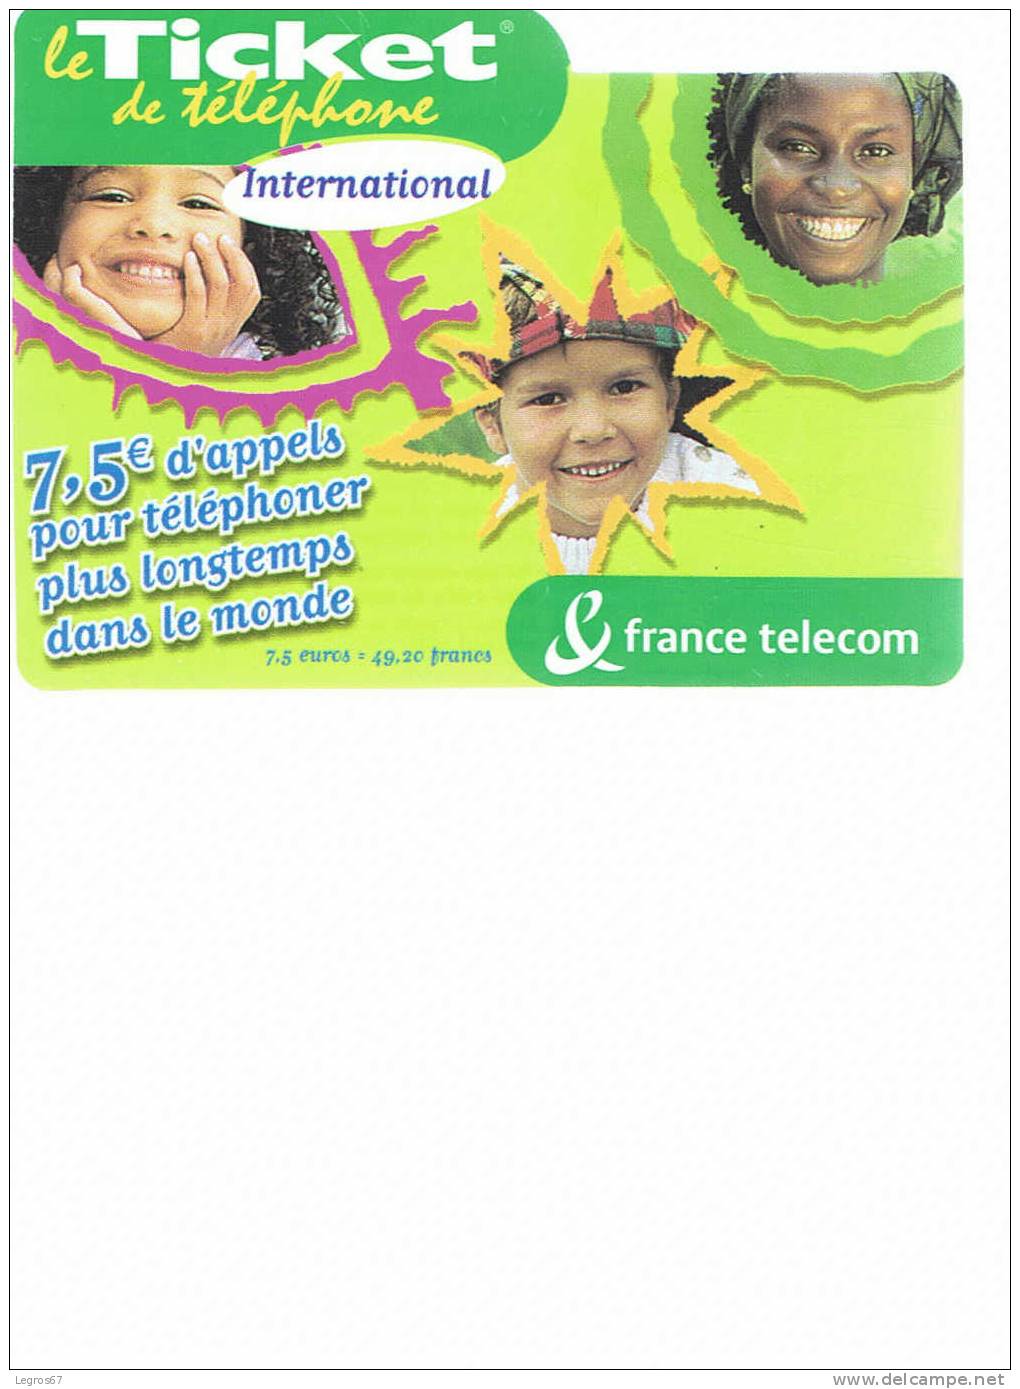 TICKET TELEPHONE 7.5 € - 31/08/2004 - FT Tickets